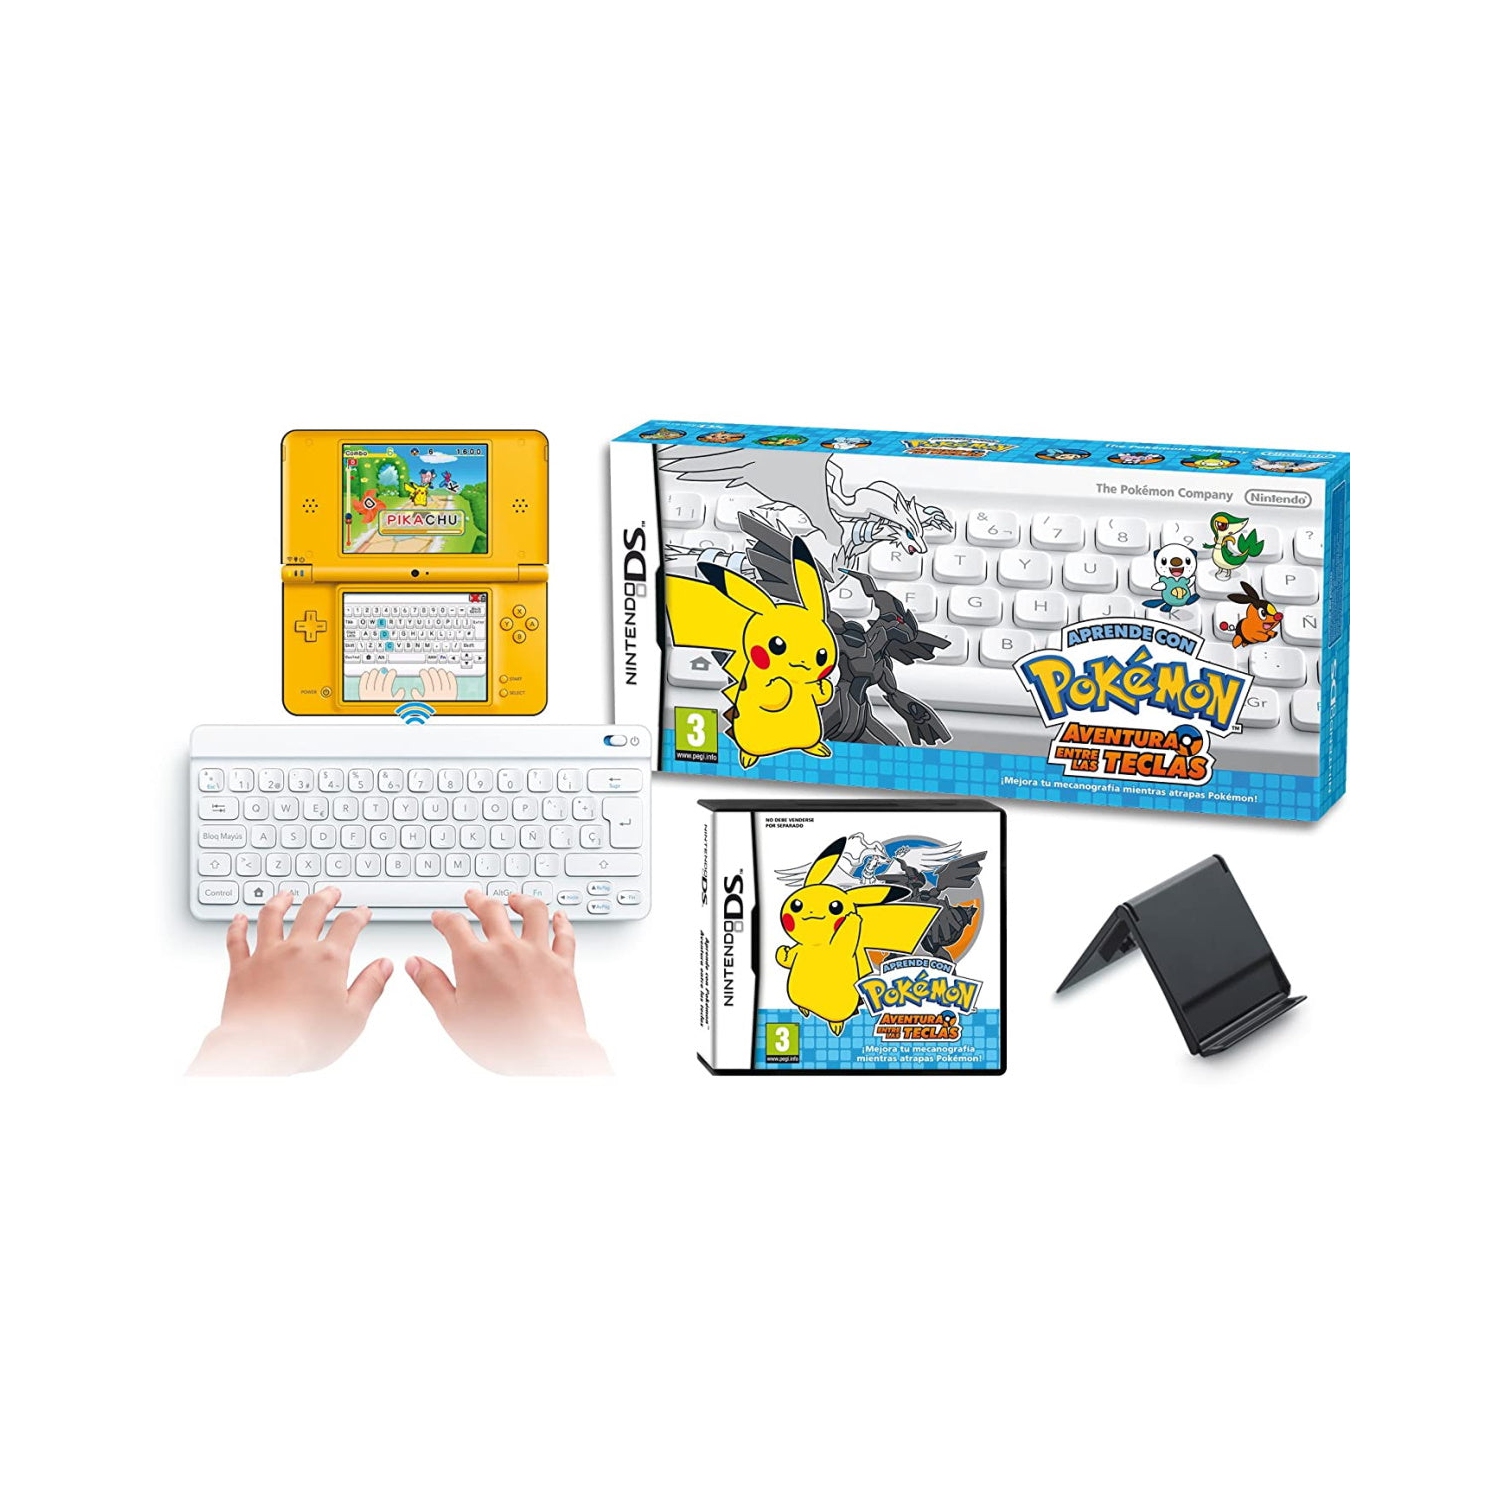 Learn with Pokemon: Typing Adventure [Nintendo DS DSi]